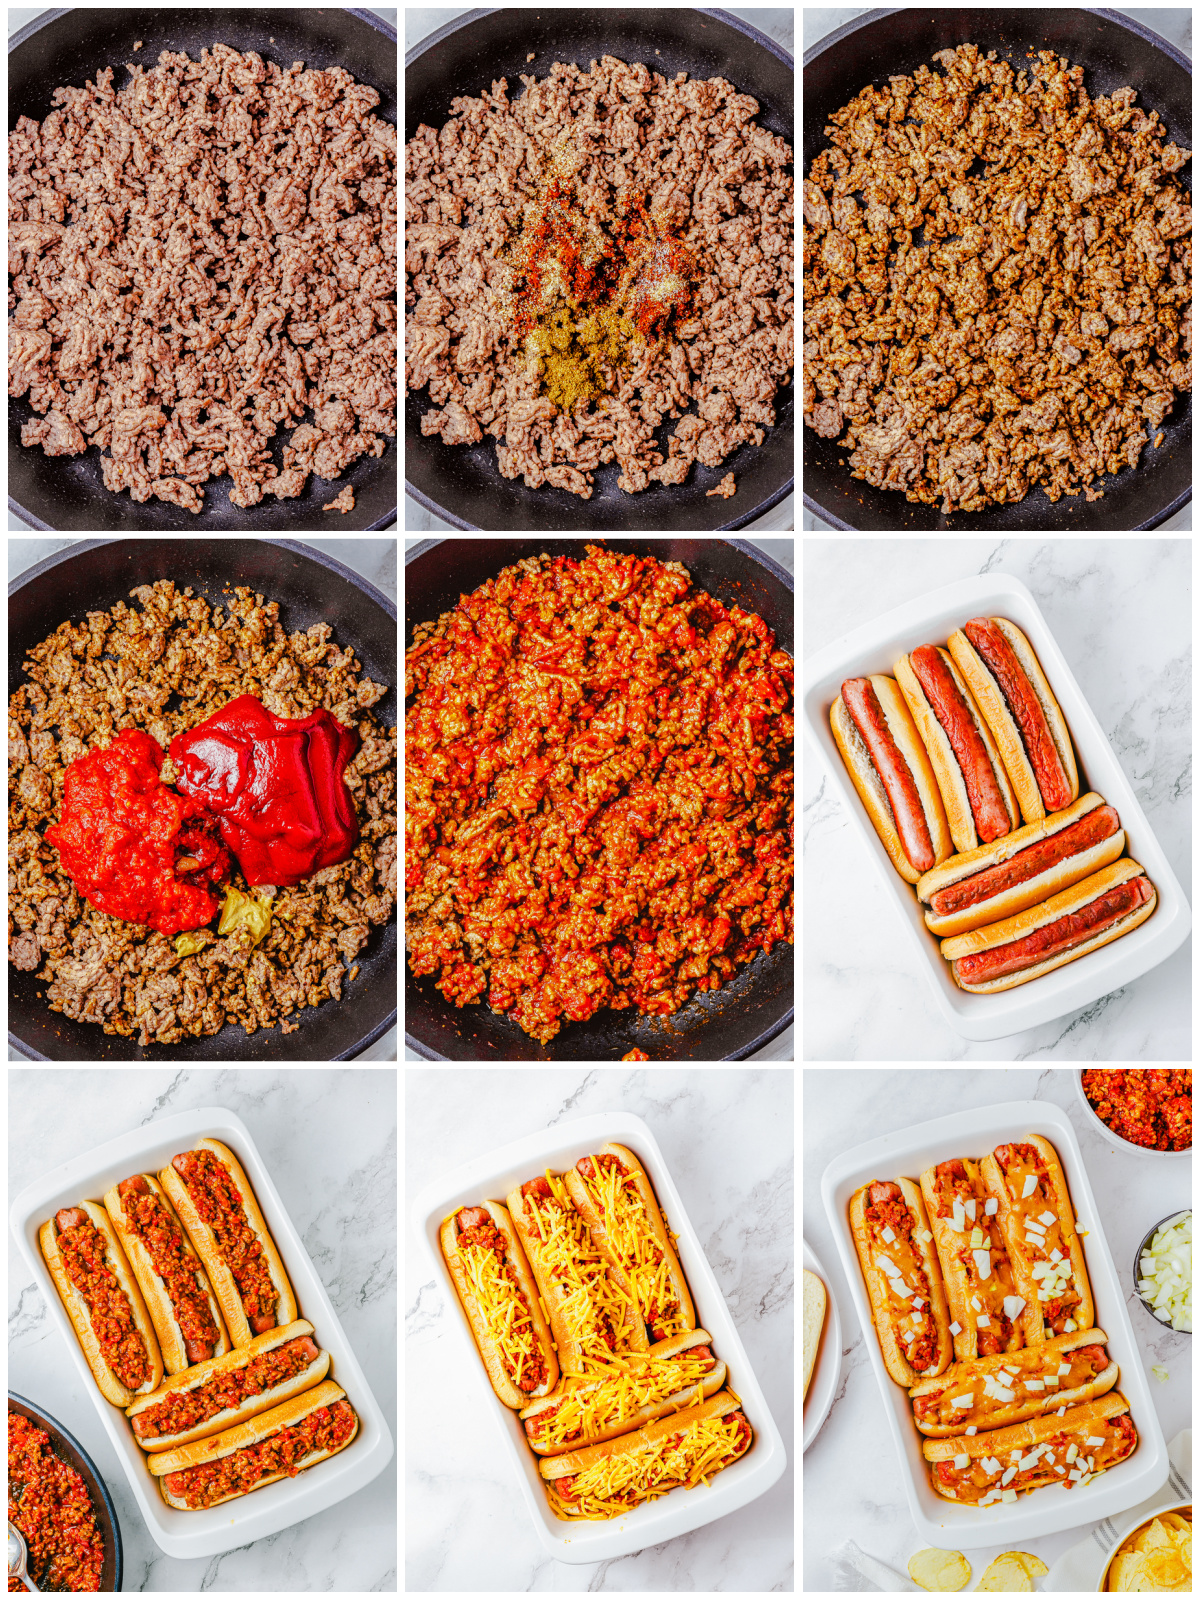 Step by step photos on how to make Chili Cheese Dogs